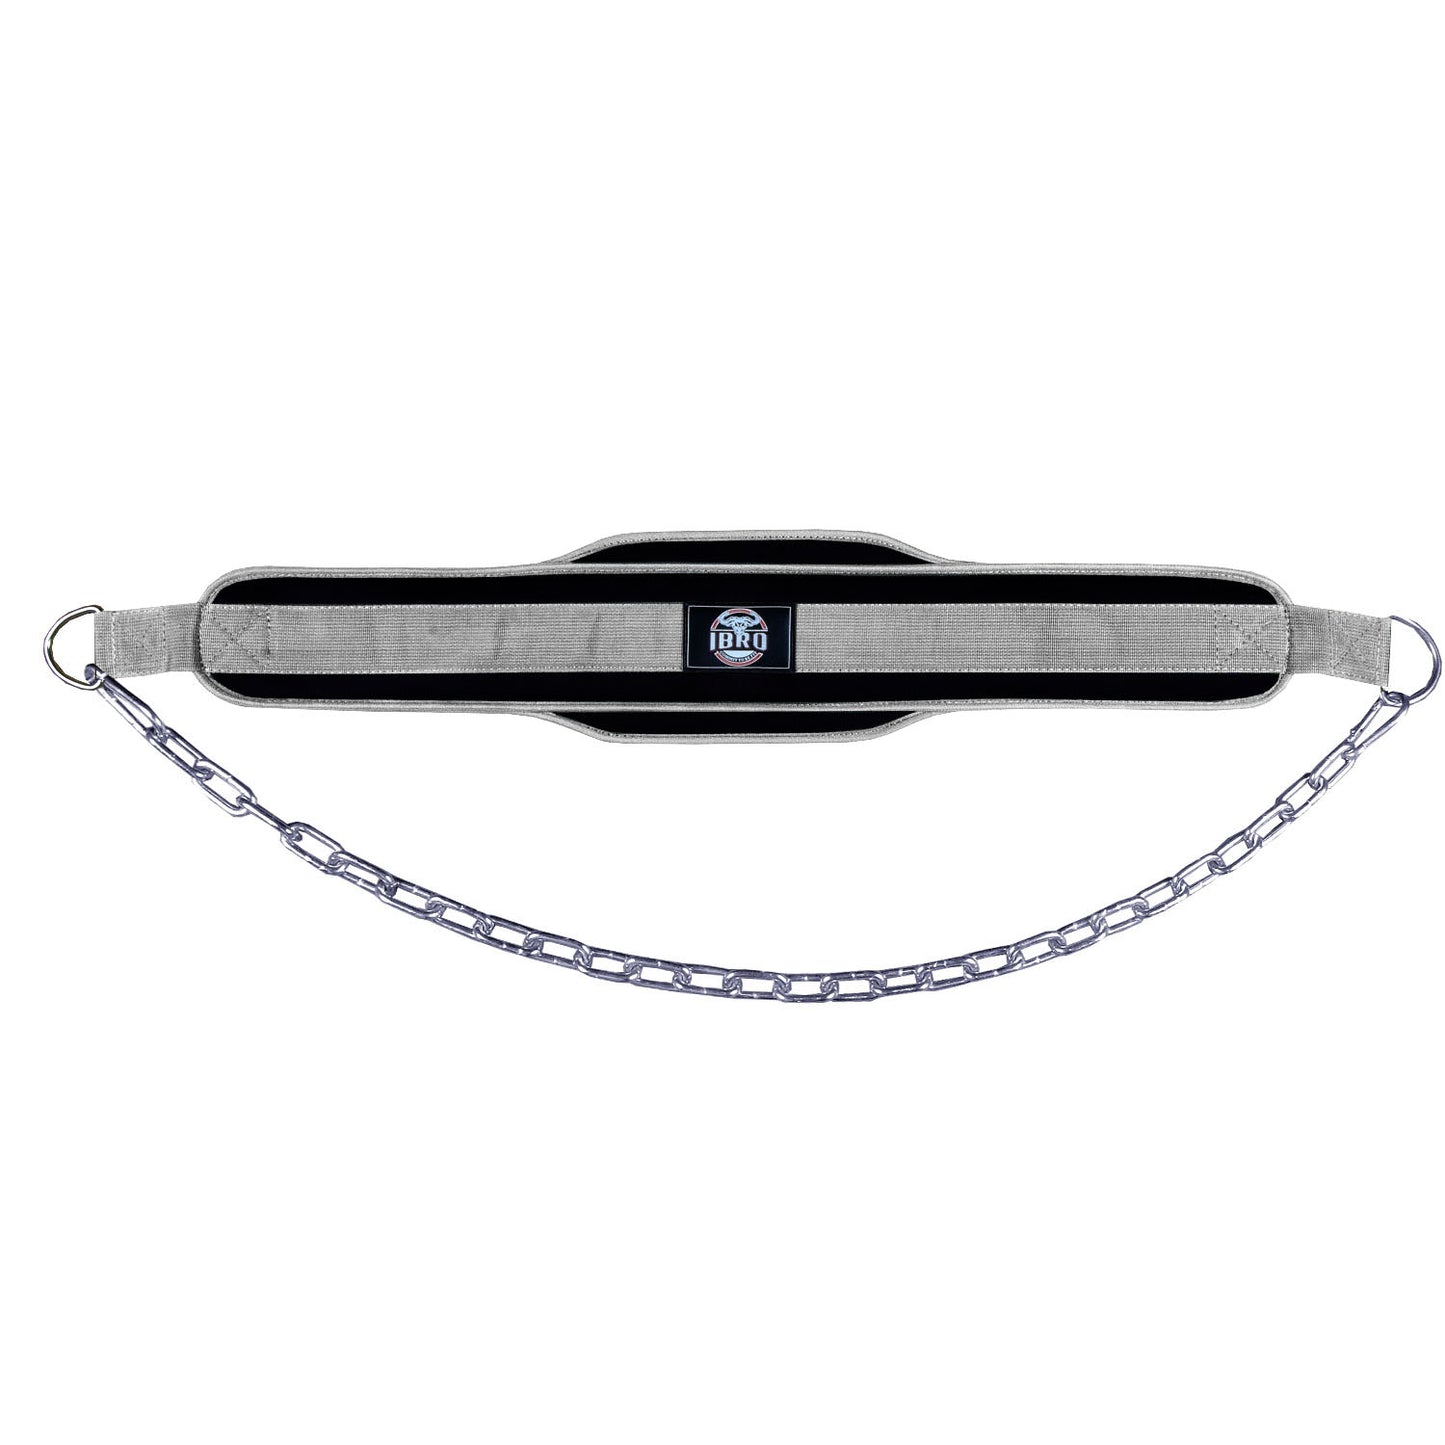 IBRO Advanced Fitness Dipping Belt with heavy Duty Long Steel Chain | Weighted Dips, Pullups, Bodybuilding, Weight Lifting | Neoprene Waist Support | for Men and Women Silver